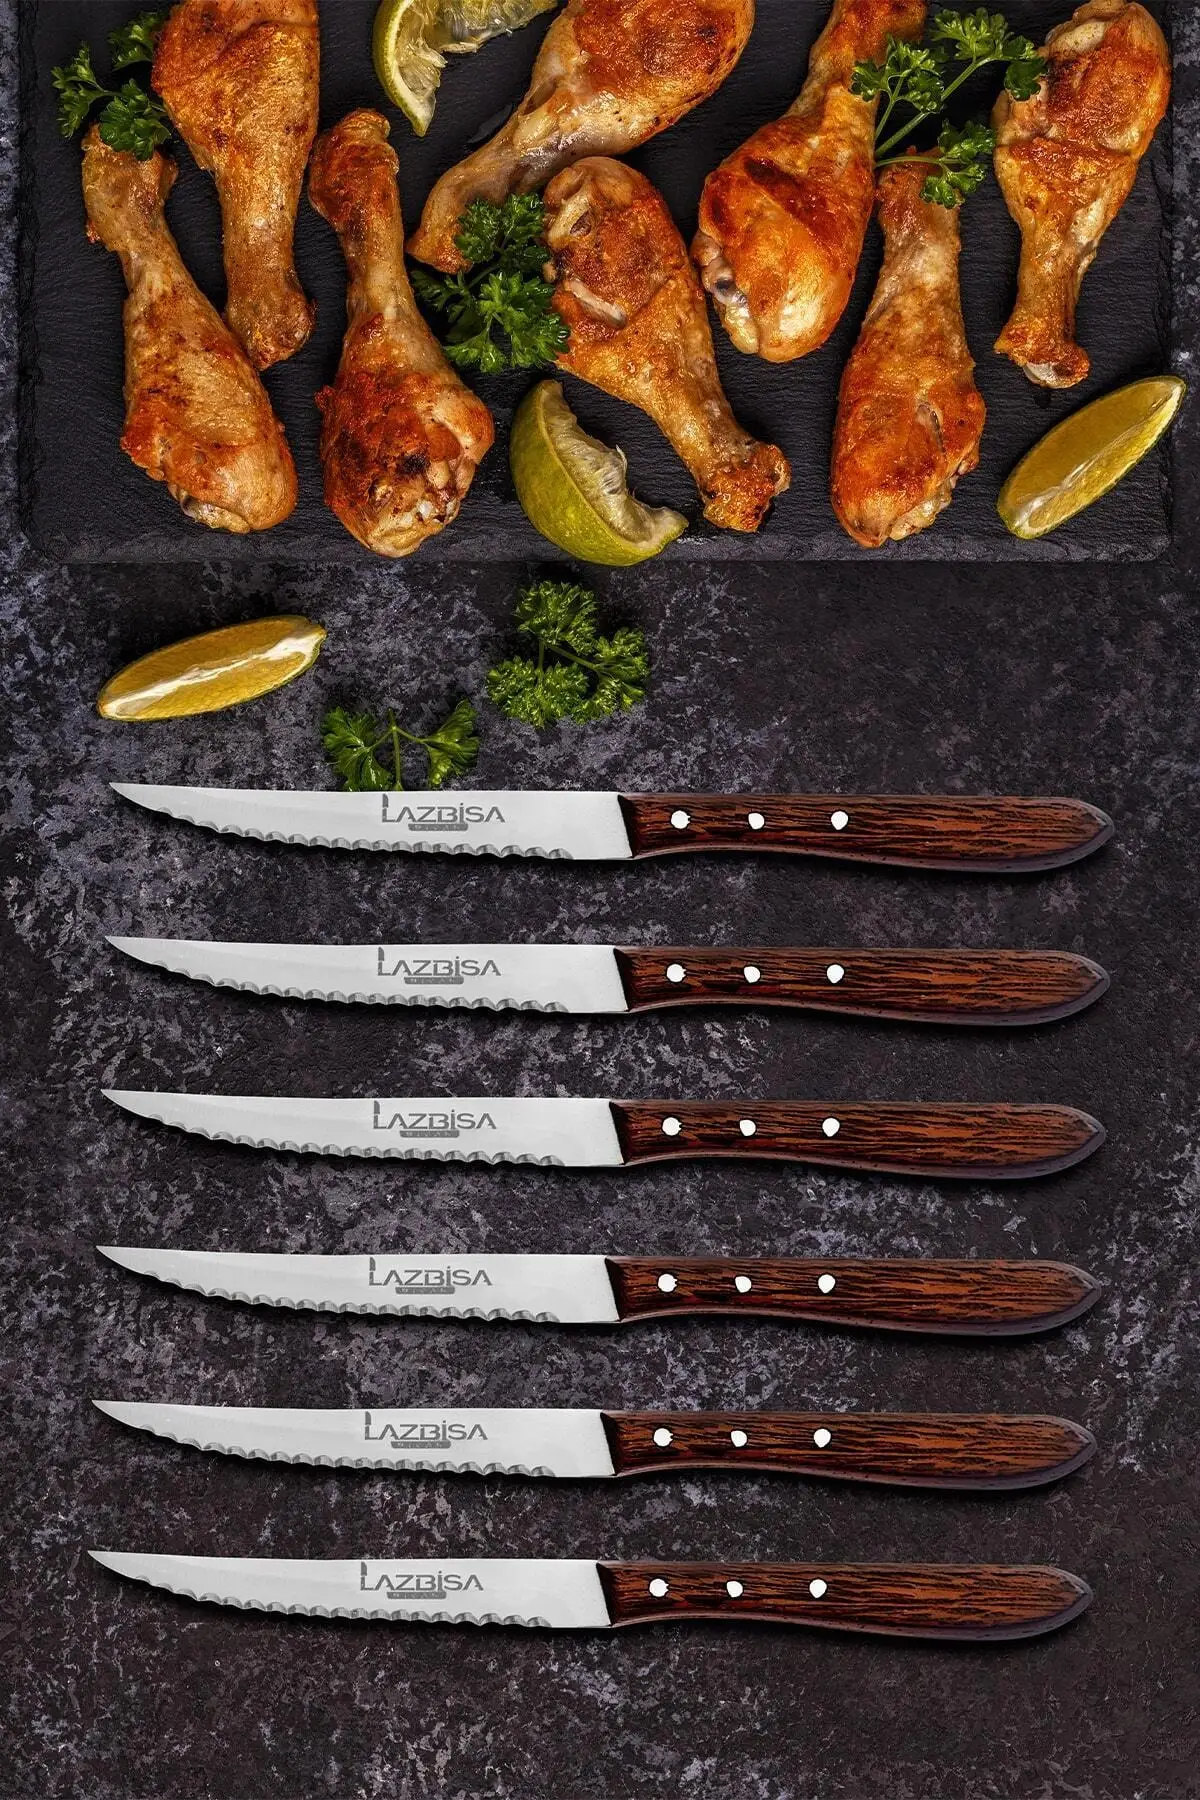 Kitchen Knife Steak Meat Restaurant Meat Cutting Chopping Fruit Vegetable Knife Stylish Wenge Wood Handle Stainless Steel